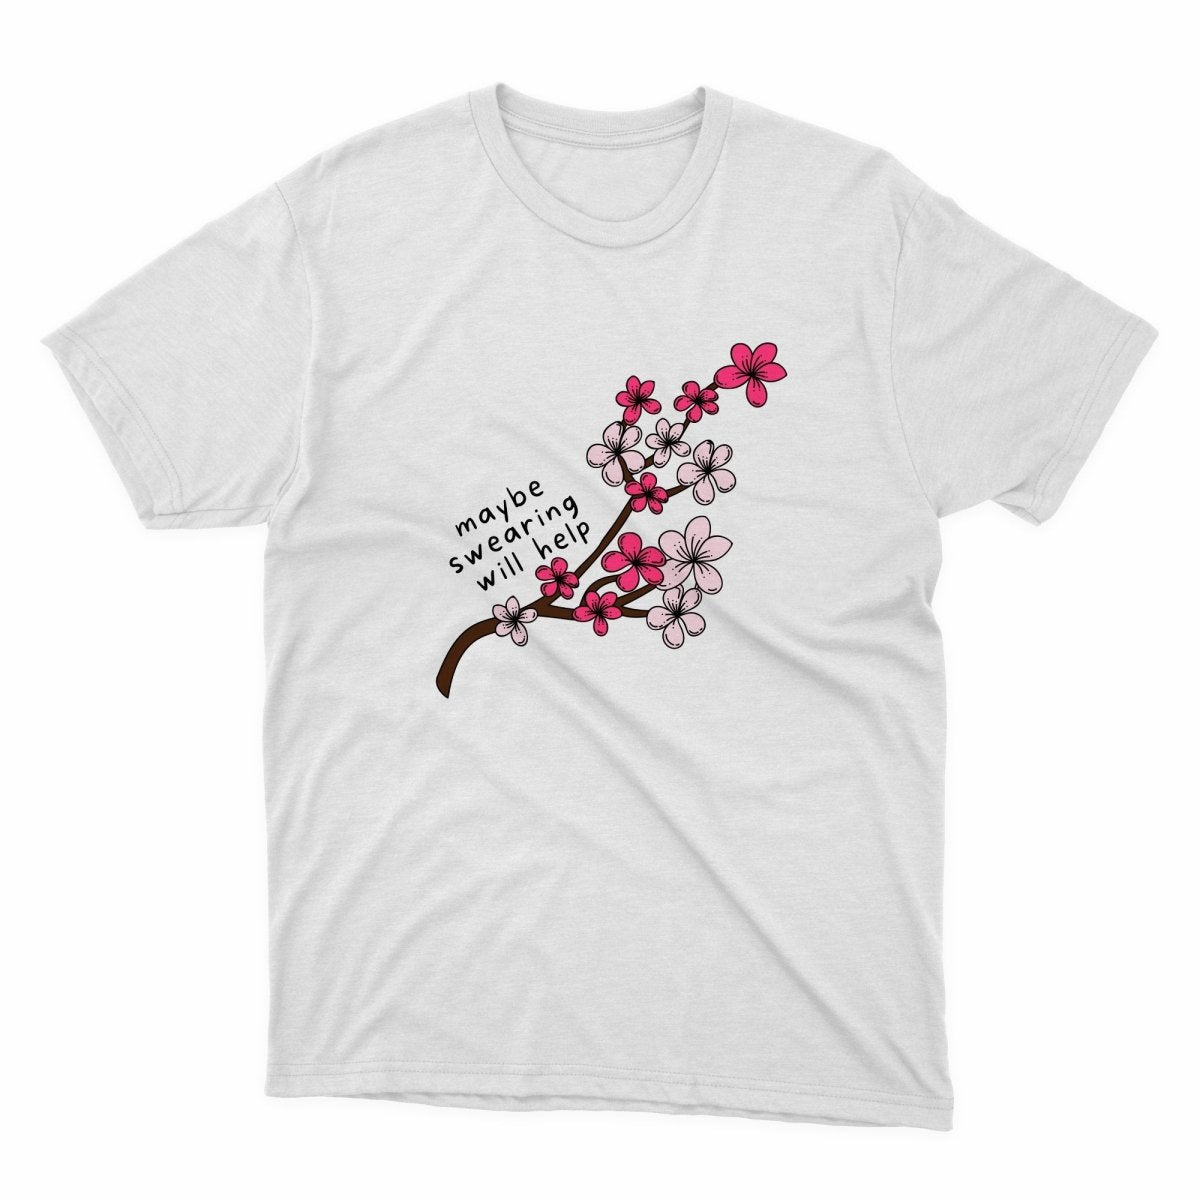 Maybe Swearing Will Help Shirt - stickerbullMaybe Swearing Will Help ShirtShirtsPrintifystickerbull91502310274338225852WhiteSa white t - shirt with pink flowers on it